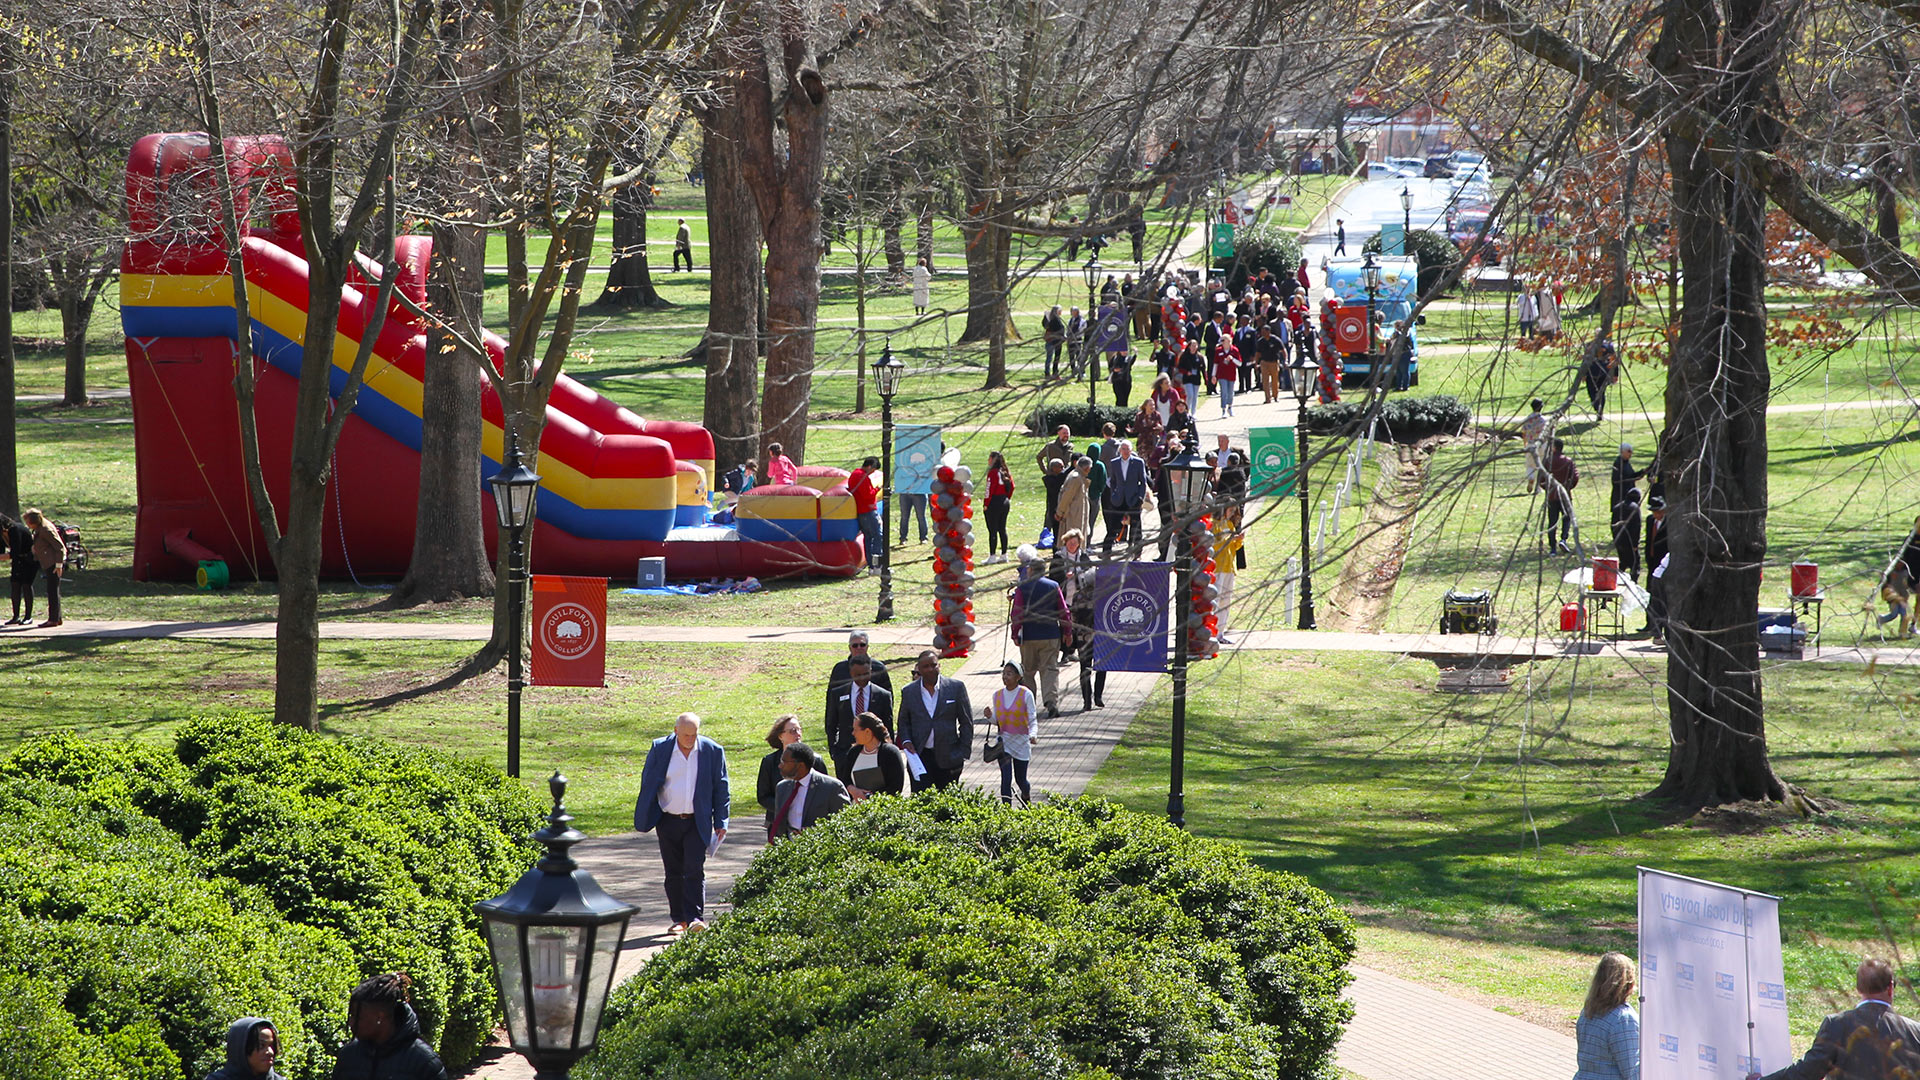 The Celebration of Community spanned the Quad.